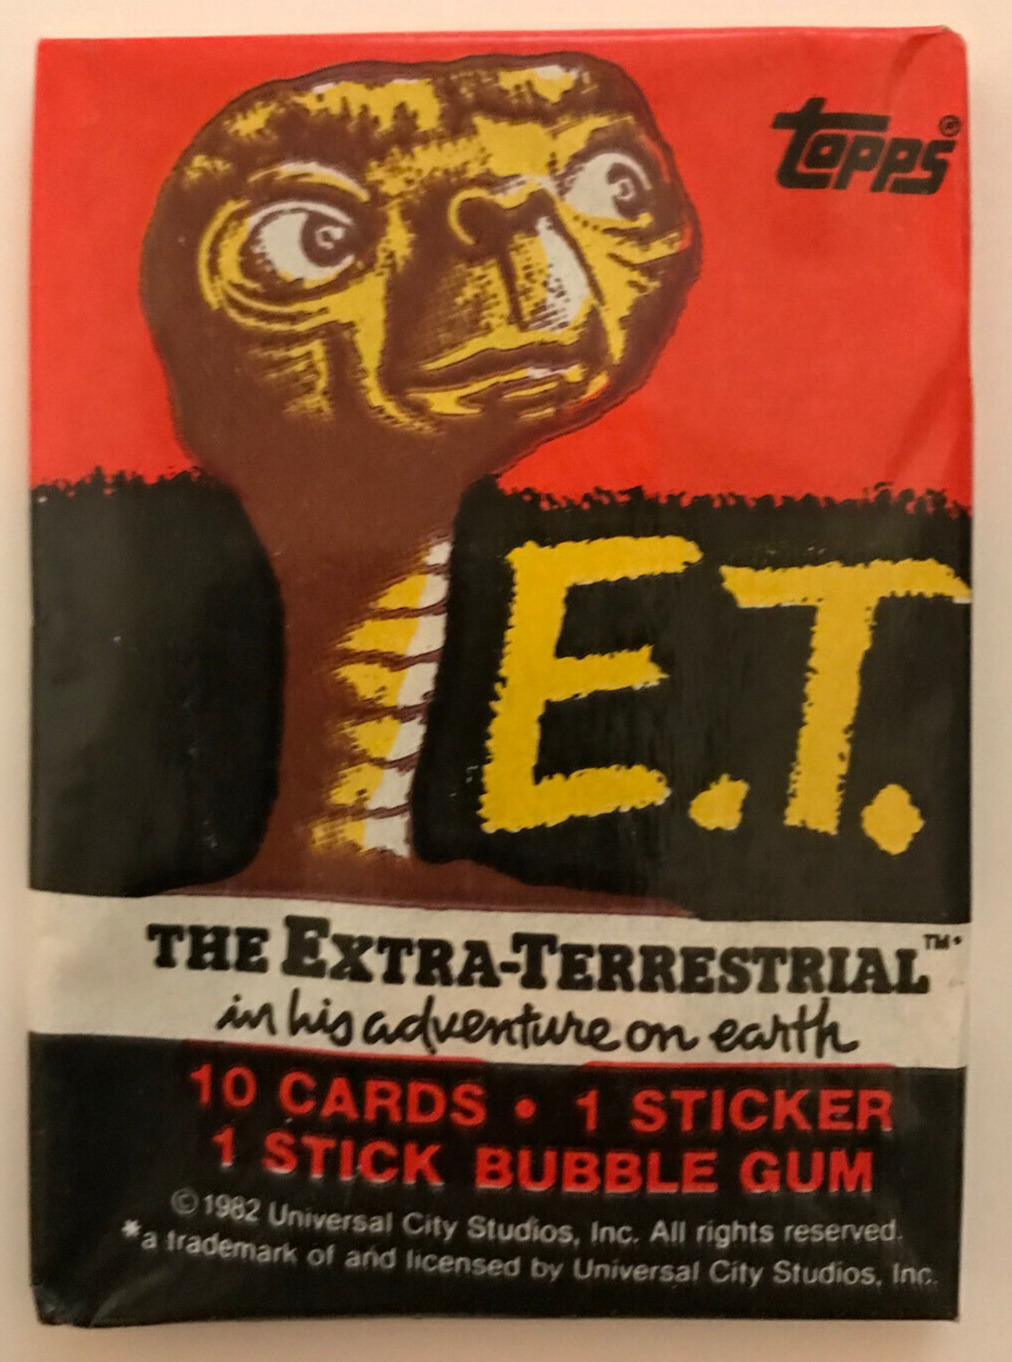 1982 Topps E.T. The Extra-Terrestrial Sealed Wax Pack, 10 Cards, 1 Sticker